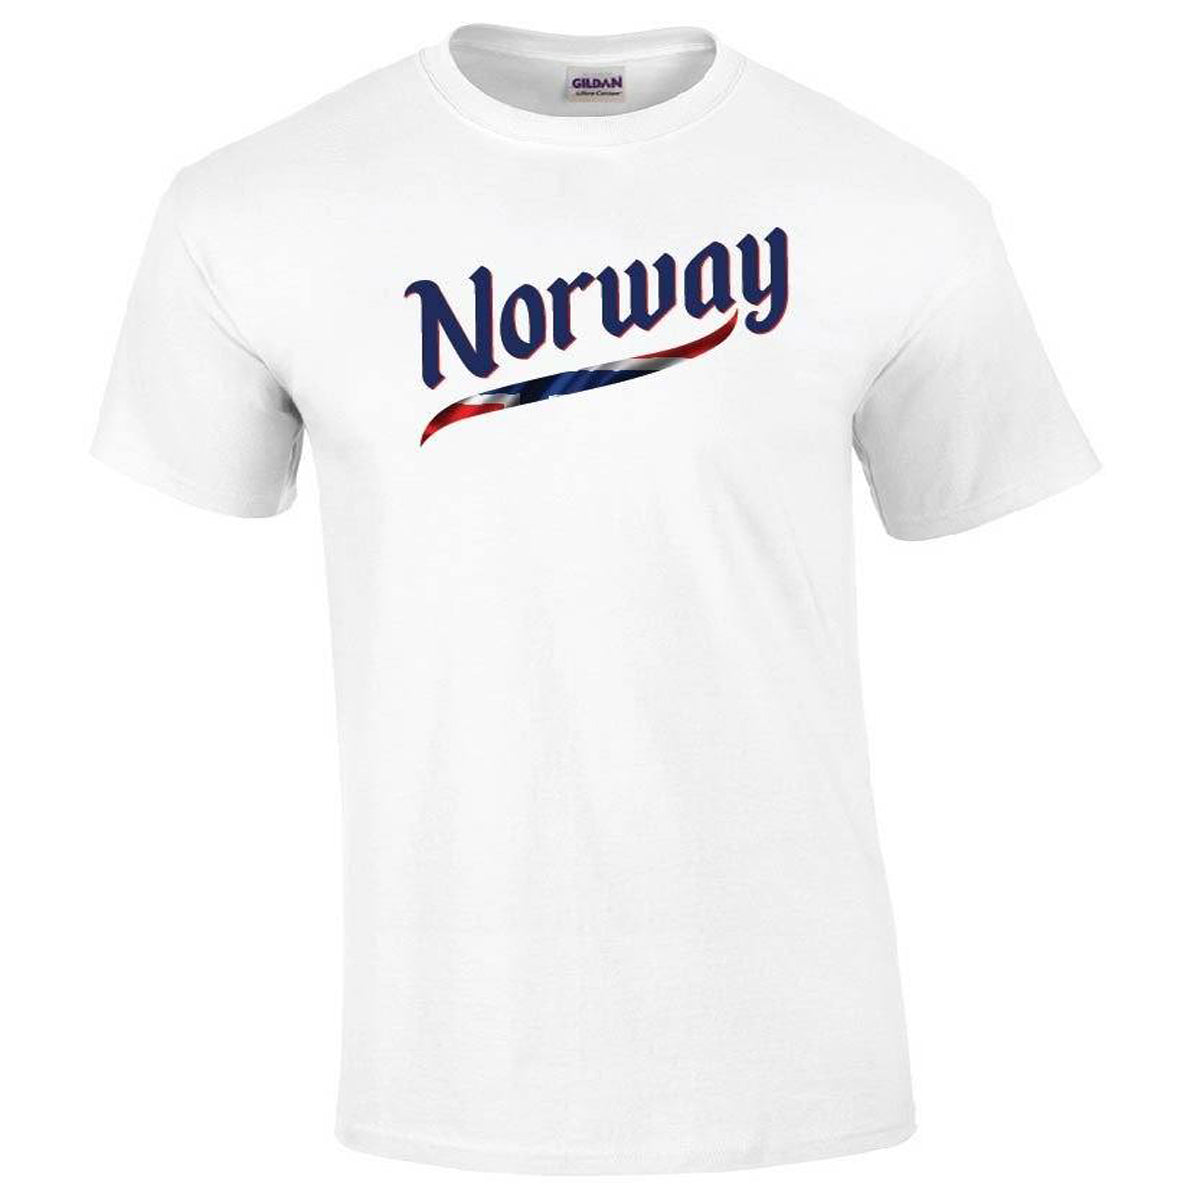 Norway Script World Cup 2019 Printed Tee T-shirts 411 Youth Medium White Youth